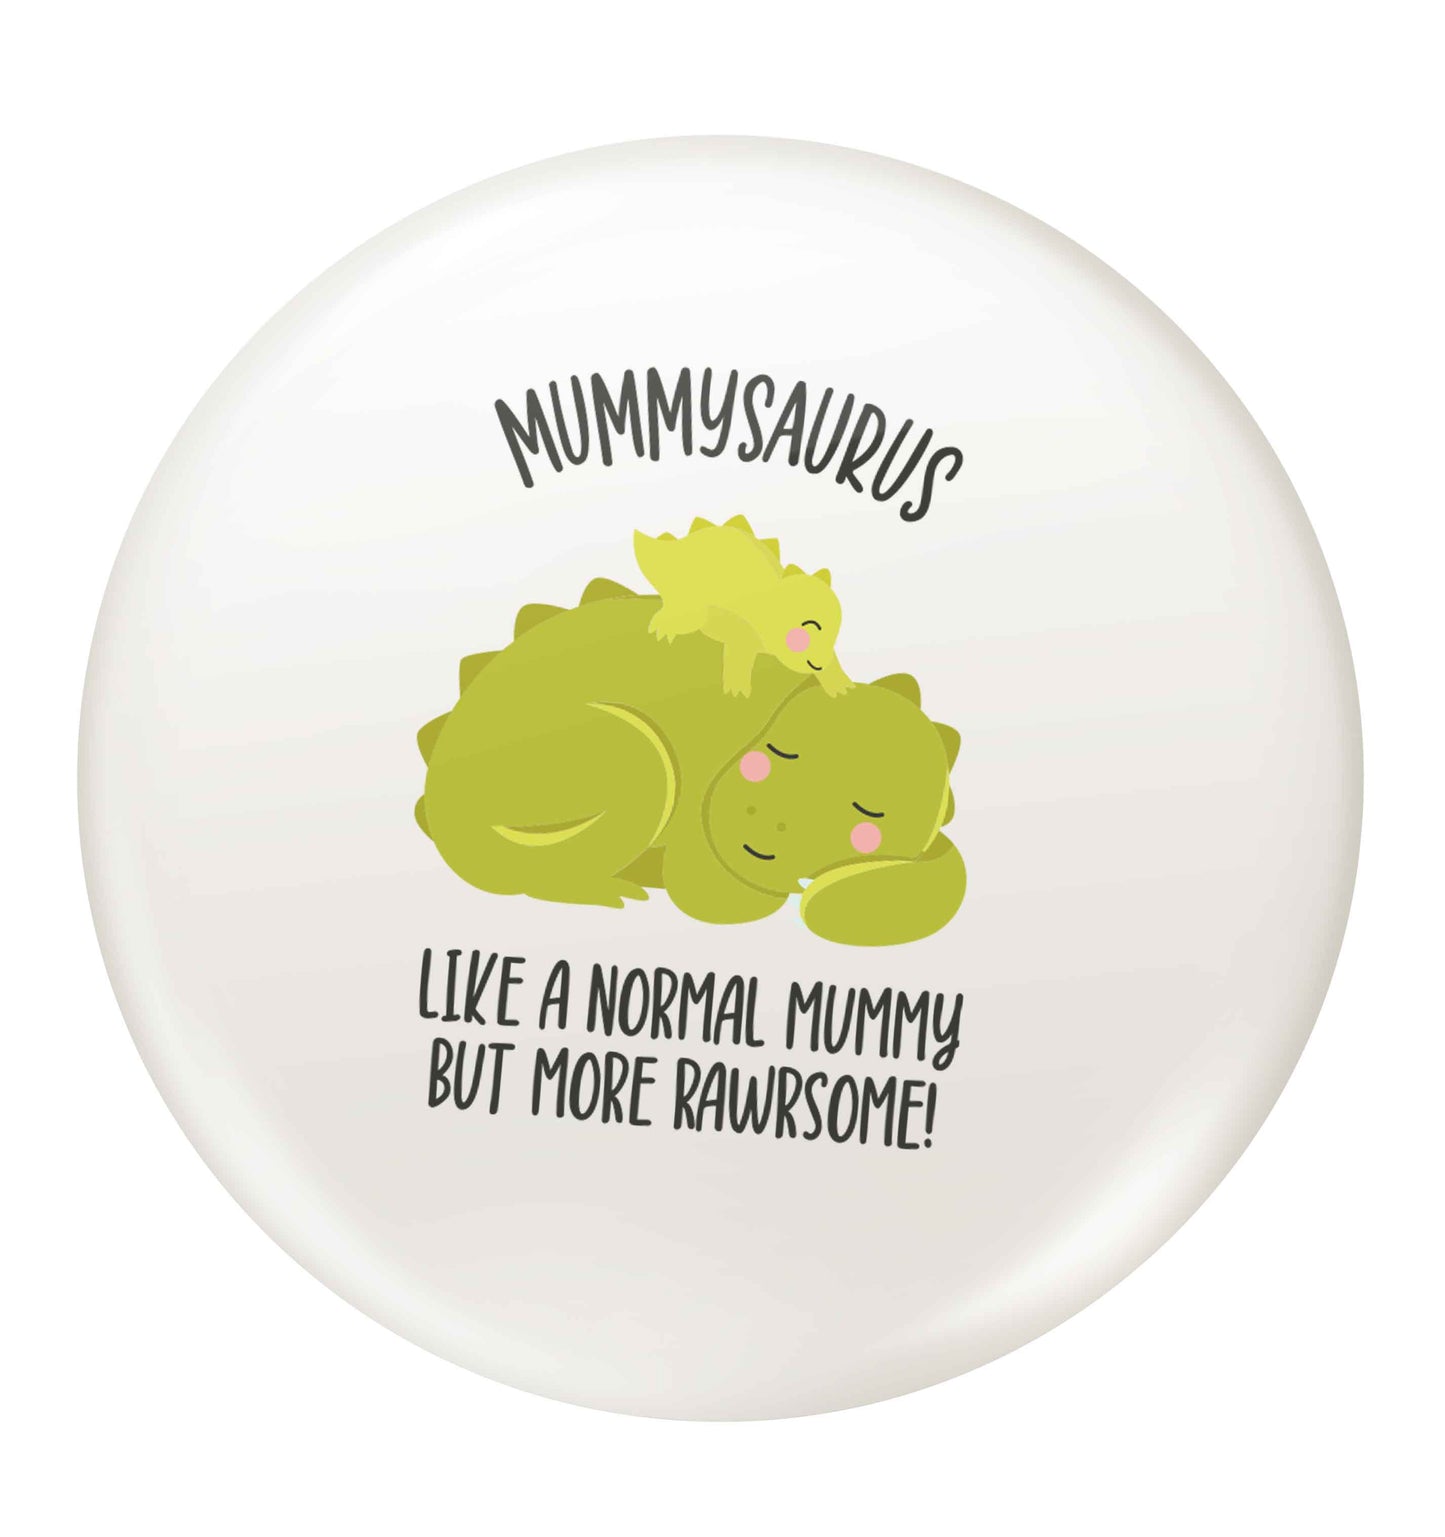 Mummysaurus like a normal mummy only more rawrsome small 25mm Pin badge